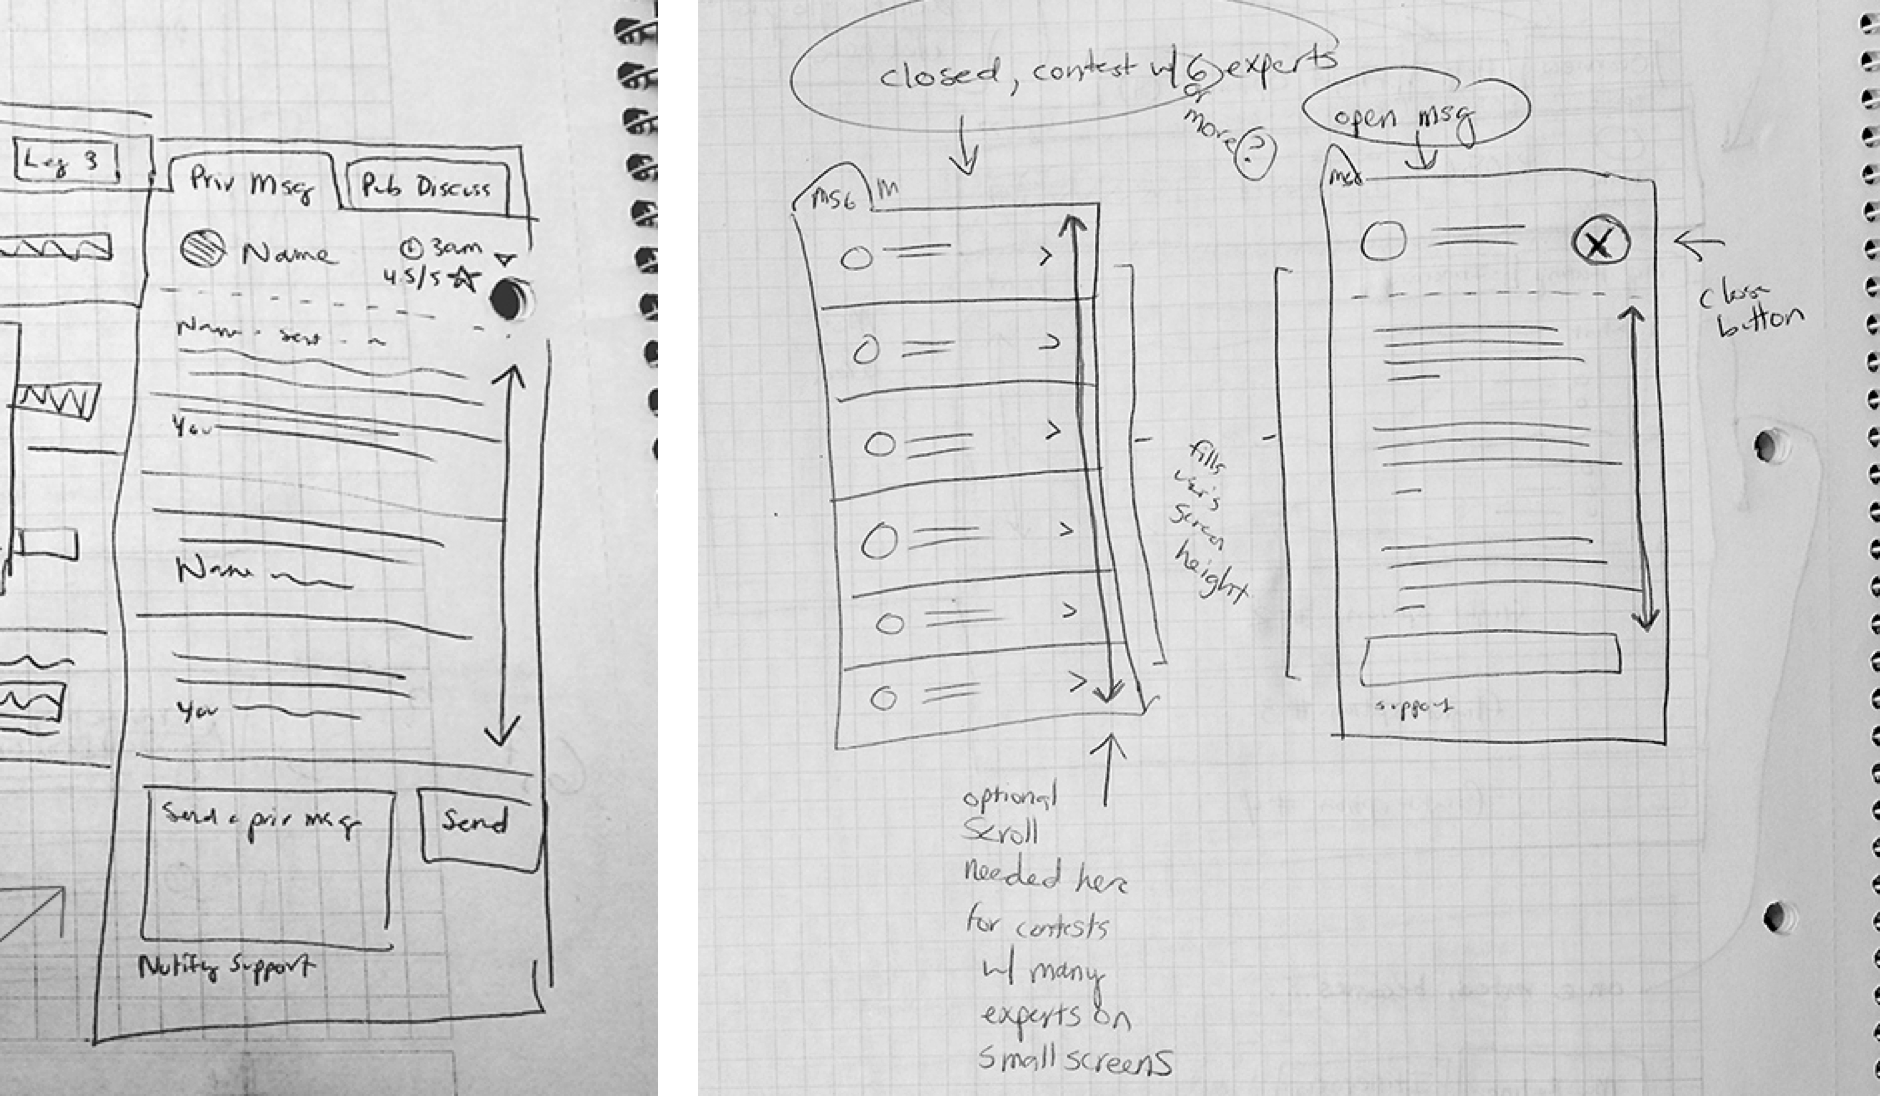 Initial sketches for an improved interface for conversations